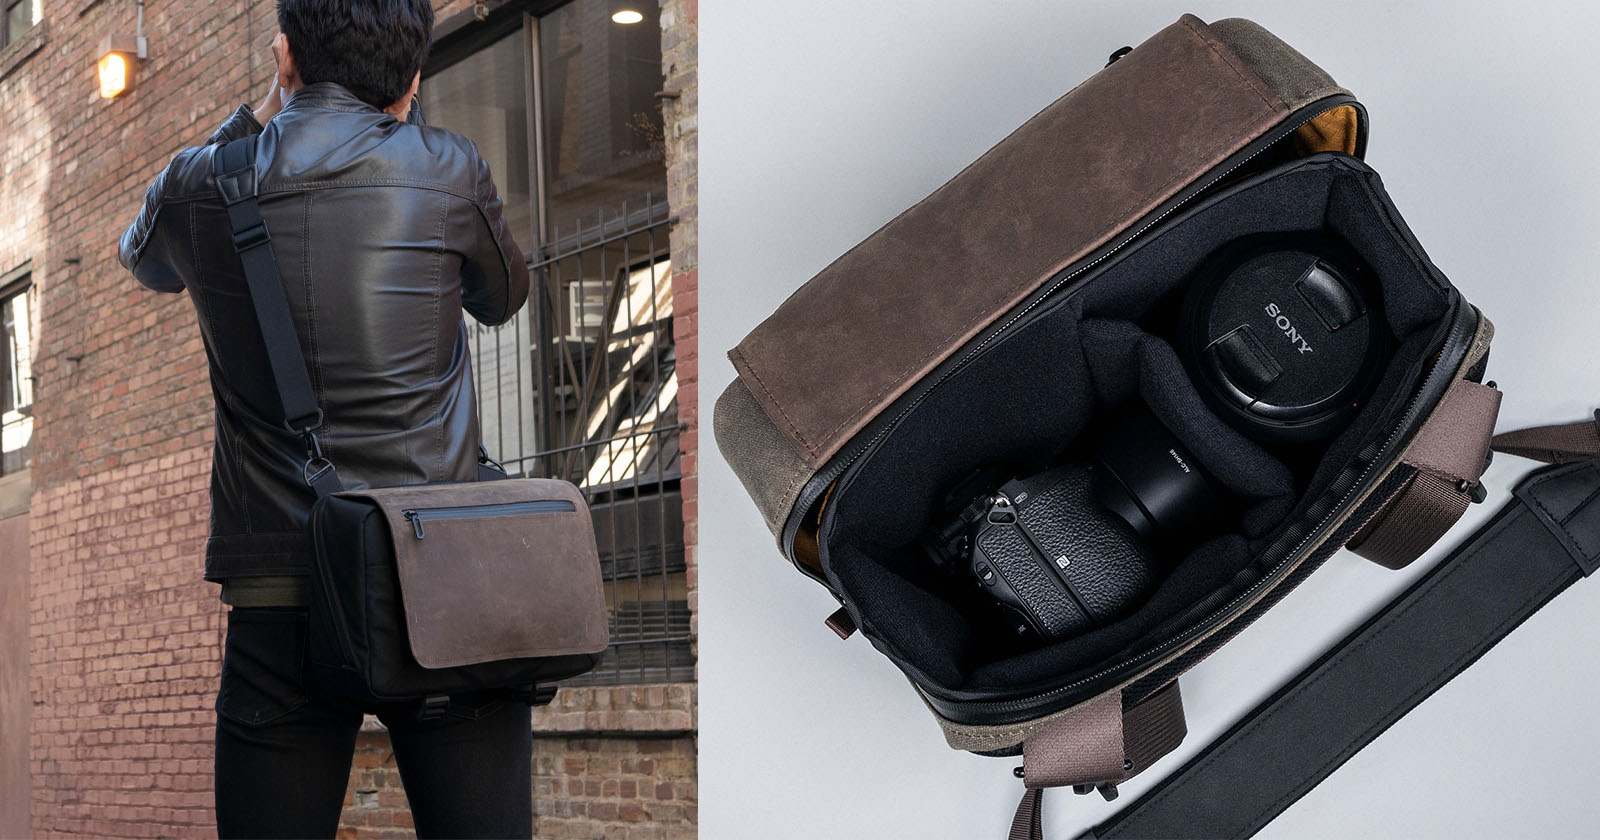 The WaterField Designs Cargo Camera Bag is a Compact Sling for the